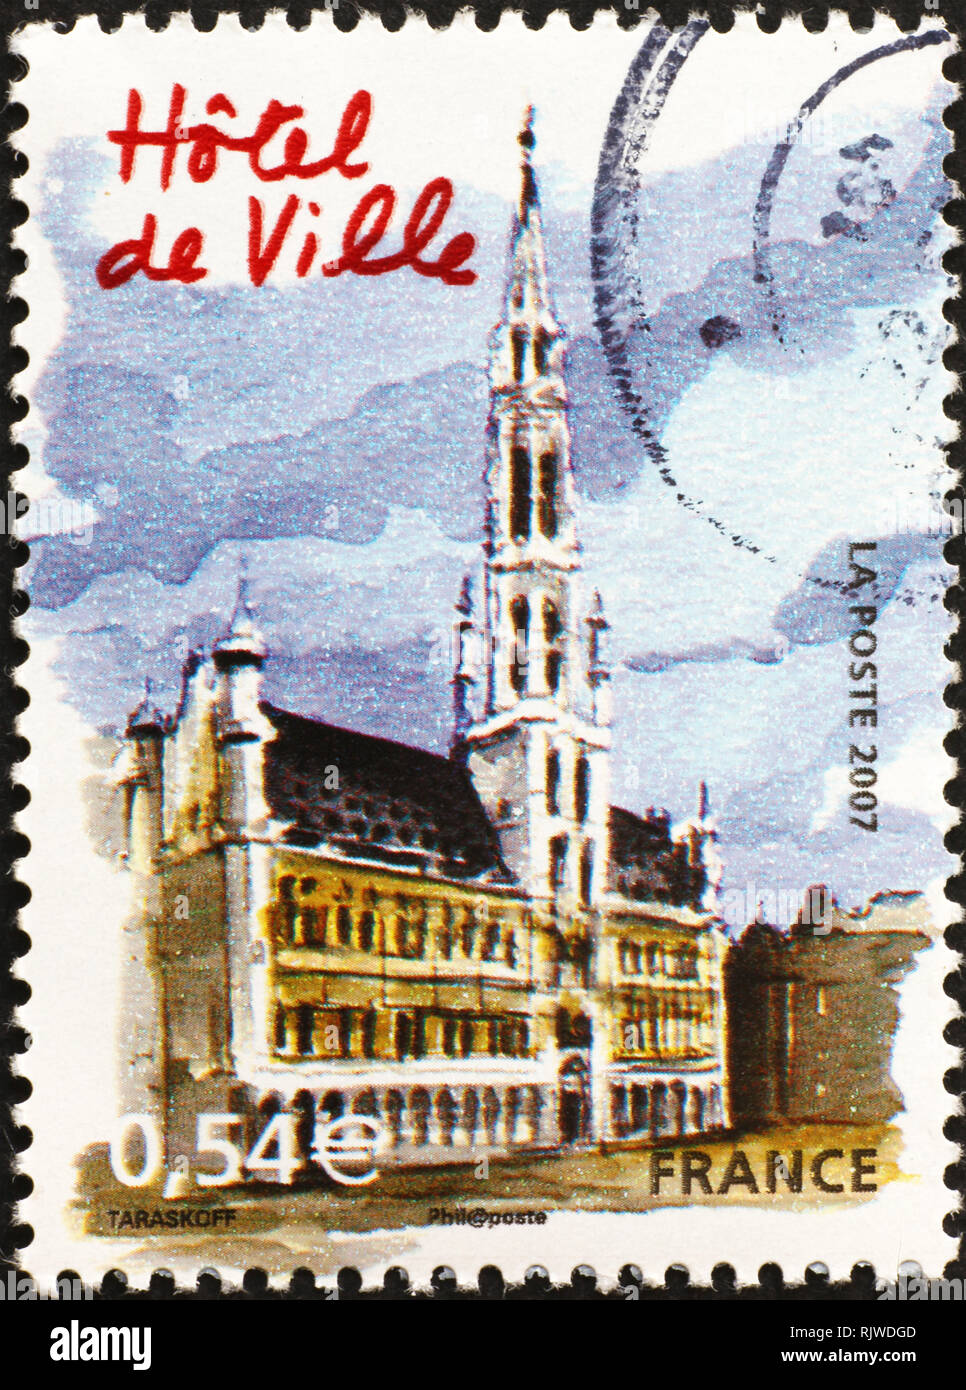 Hotel de ville of Brussels on postage stamp Stock Photo